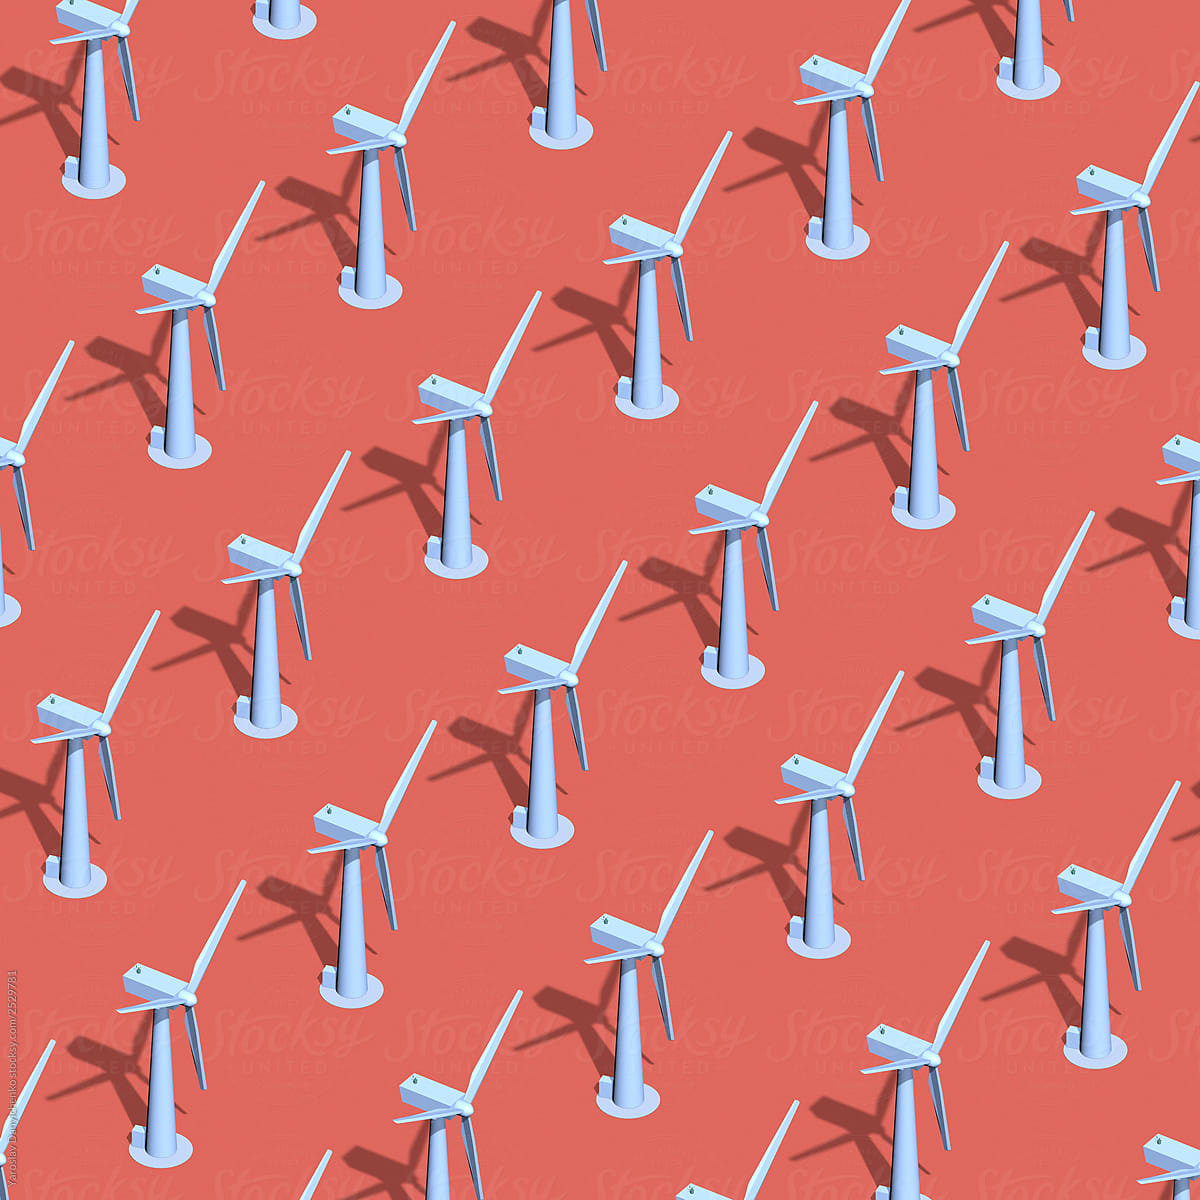 Pattern with plastic wind turbines on a living coral background.